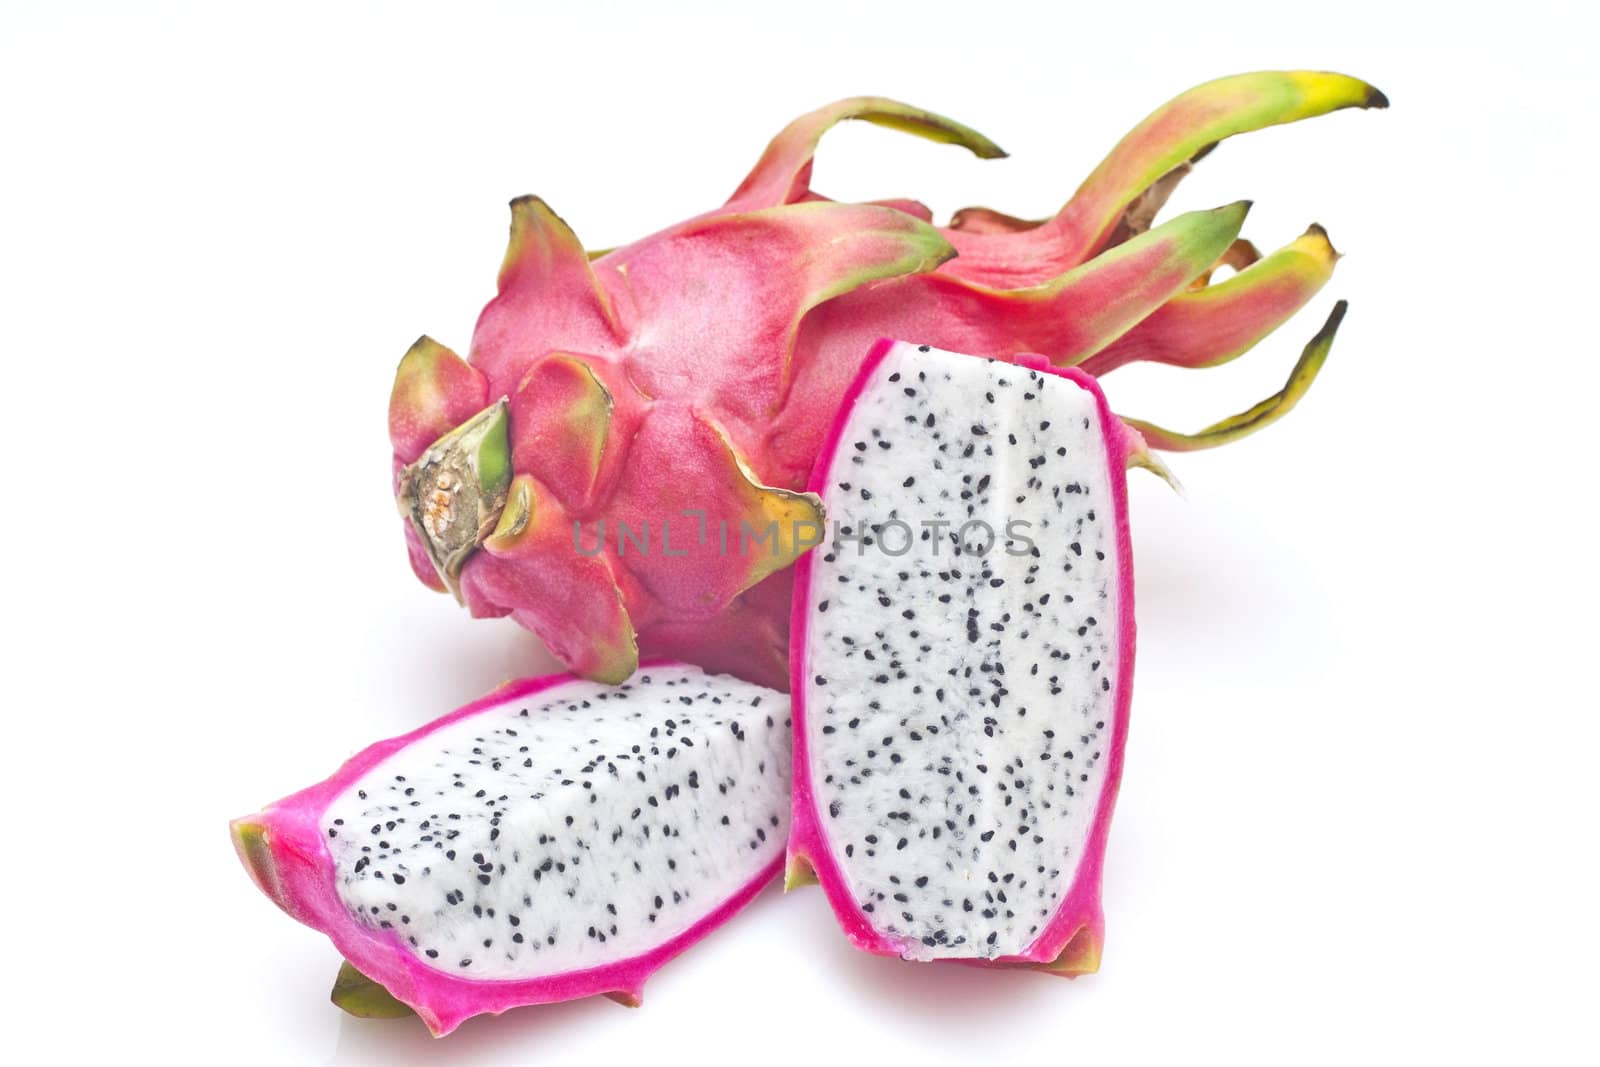 Vivid and vibrant dragon fruit isolated on white background by kawing921